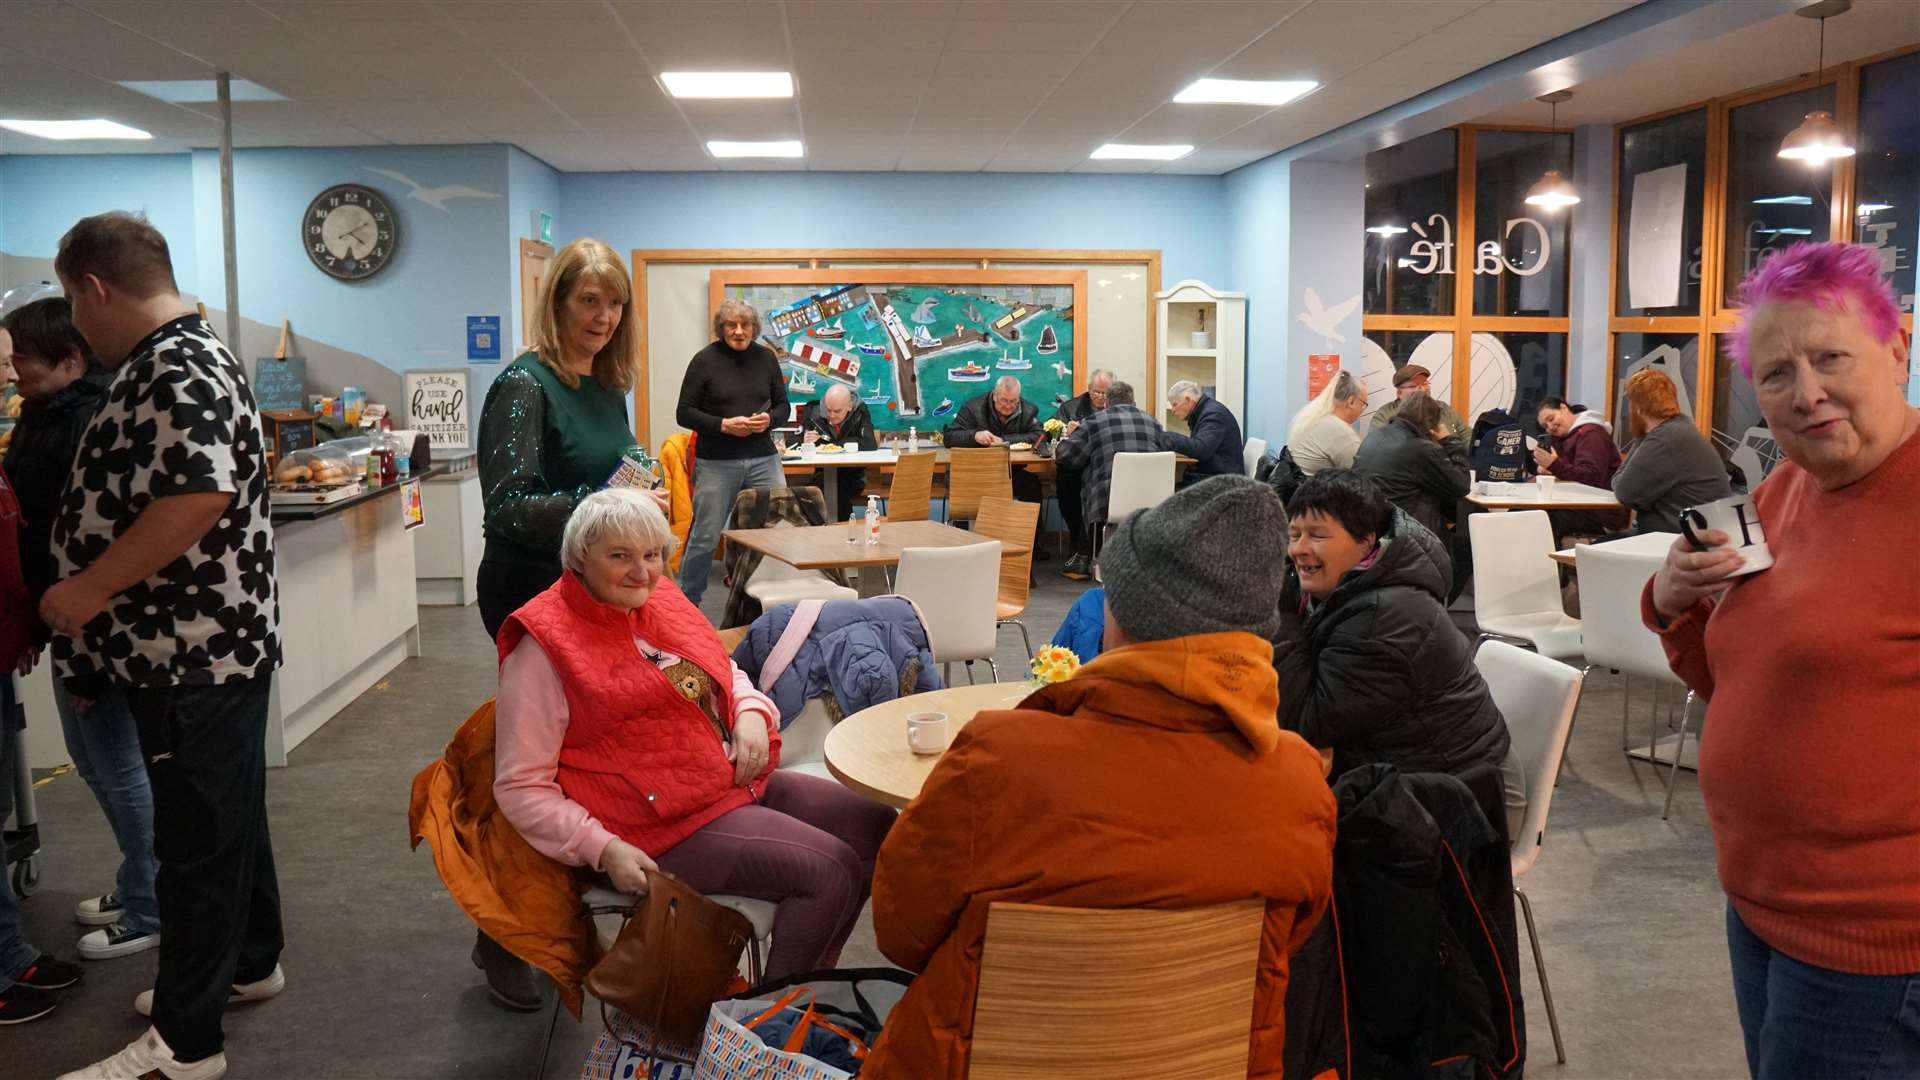 The community meal brought many in through the doors of the community centre to enjoy the happy atmosphere. Picture: DGS